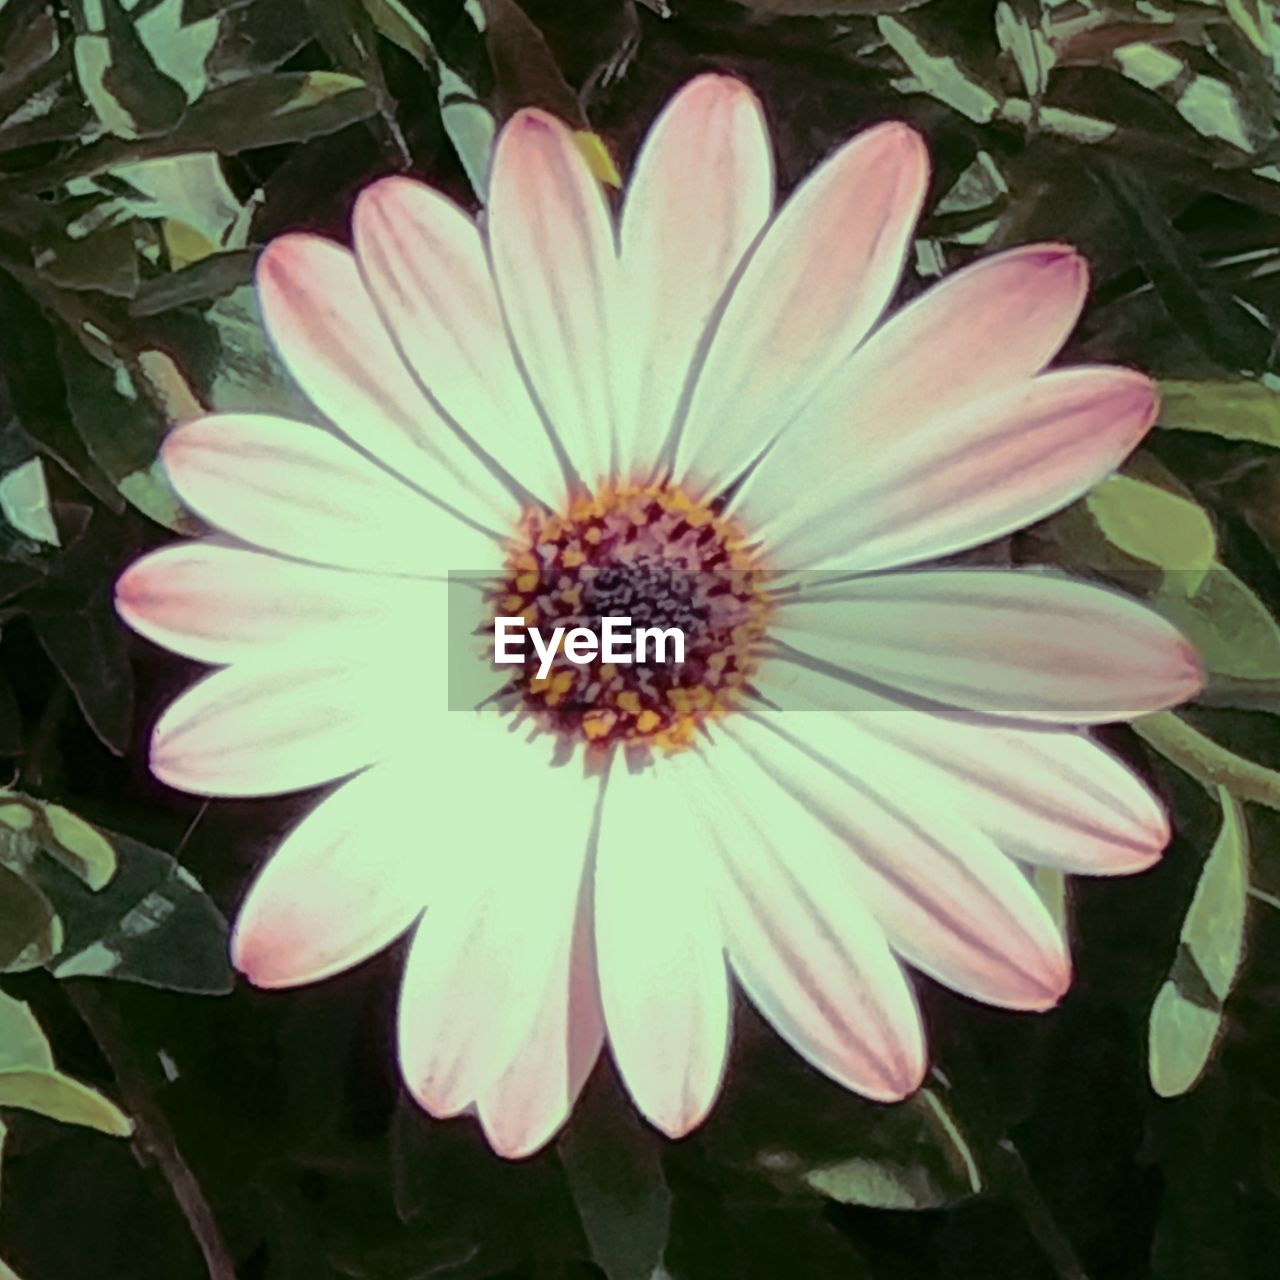 CLOSE-UP OF DAISY FLOWER BLOOMING OUTDOORS